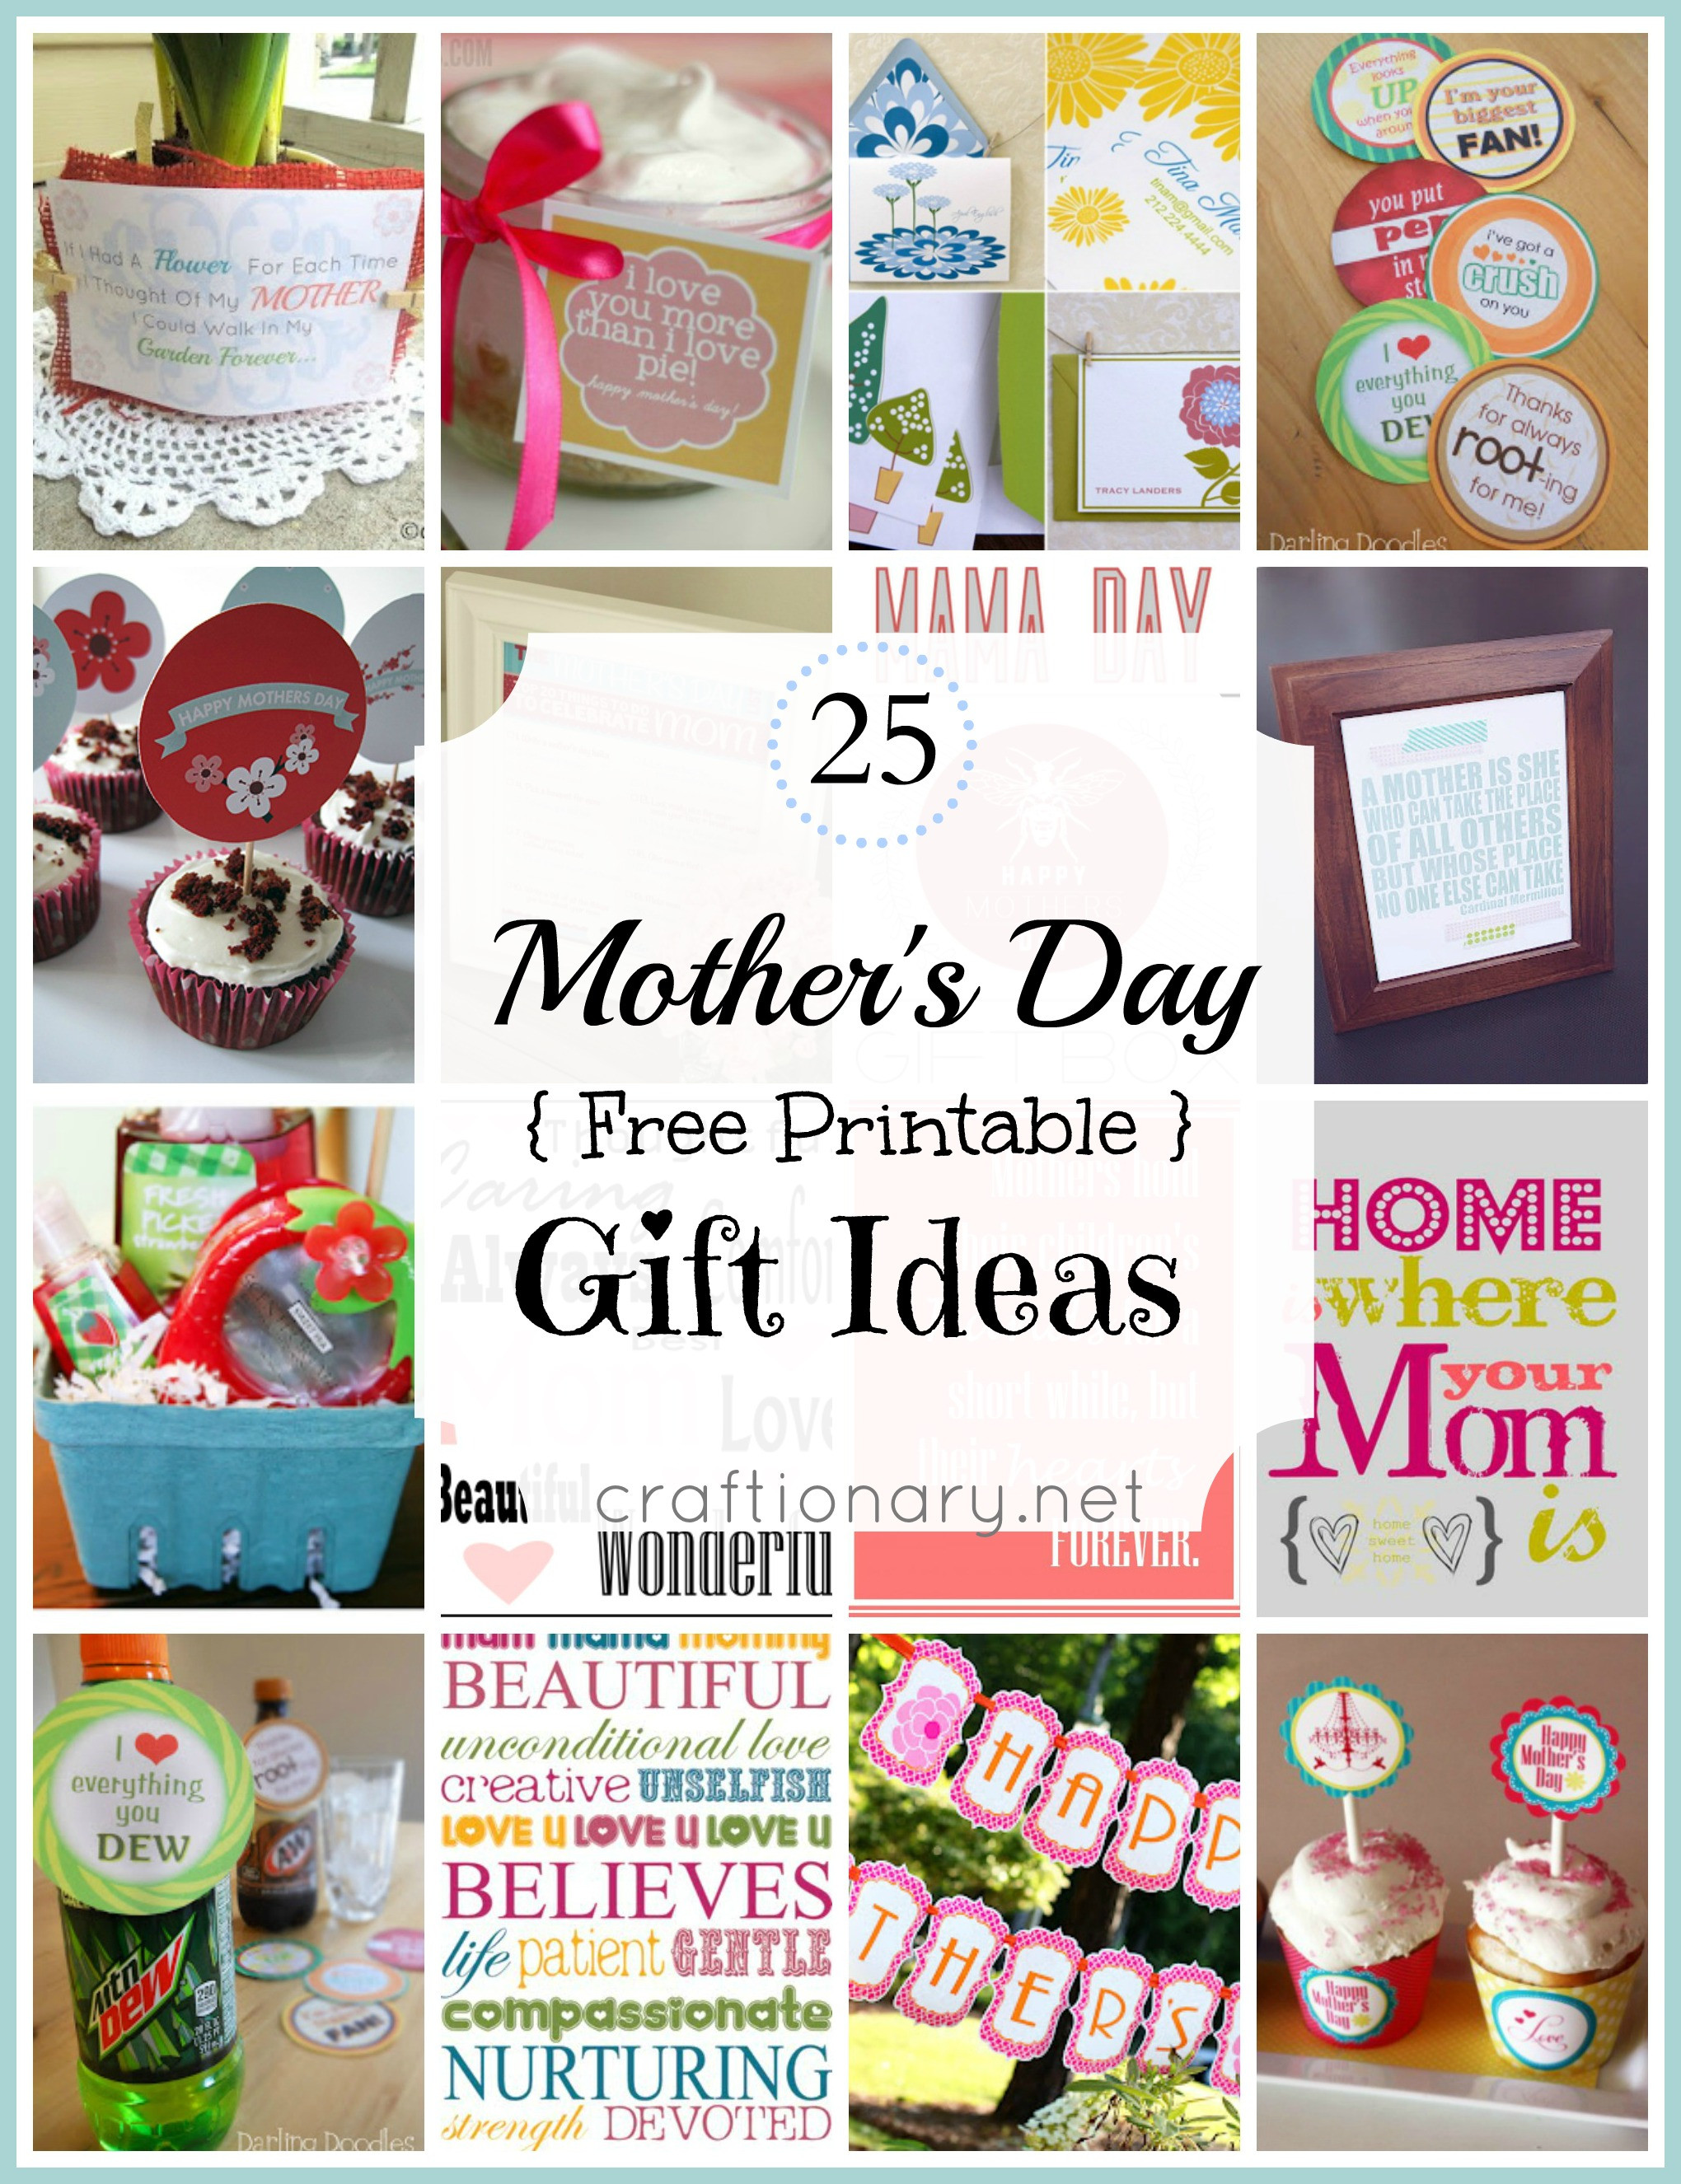 Ideas For Mothers Day Gift
 Craftionary